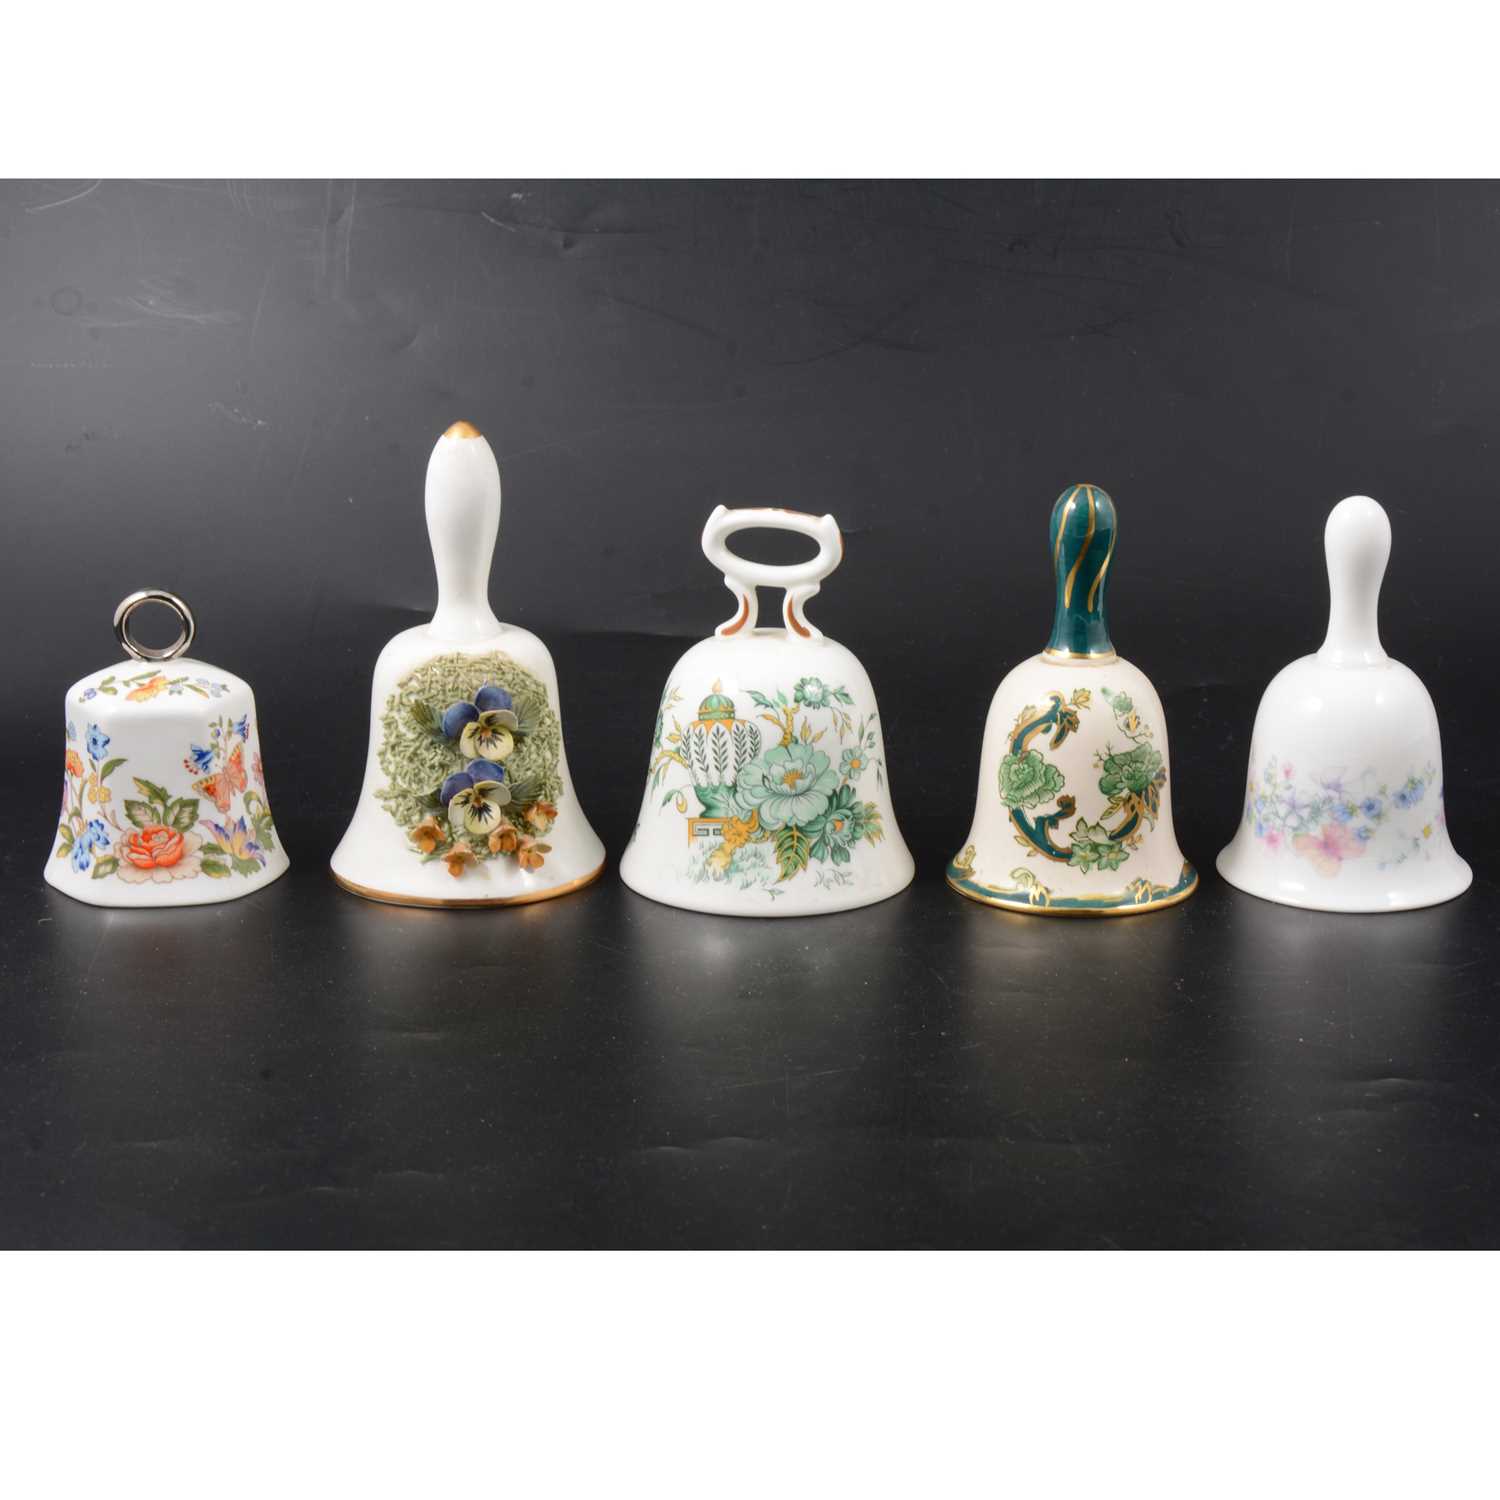 Lot 28 - China and glass ornaments